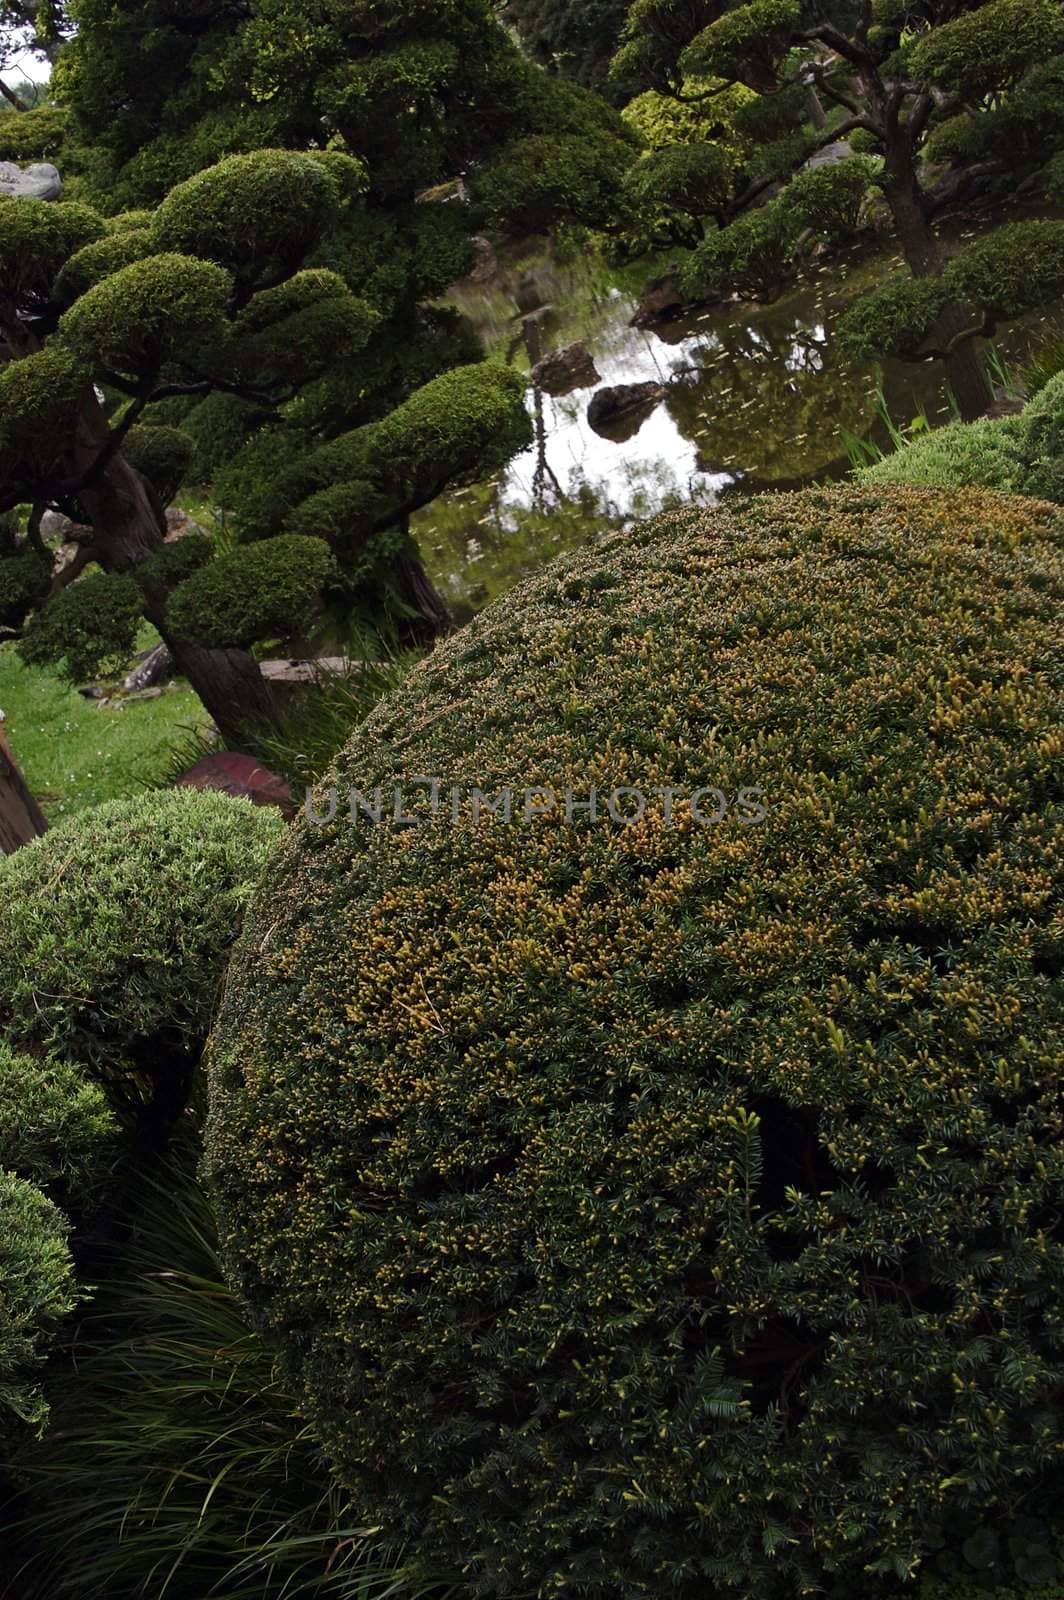 Round trees and bushes in a japanese garden